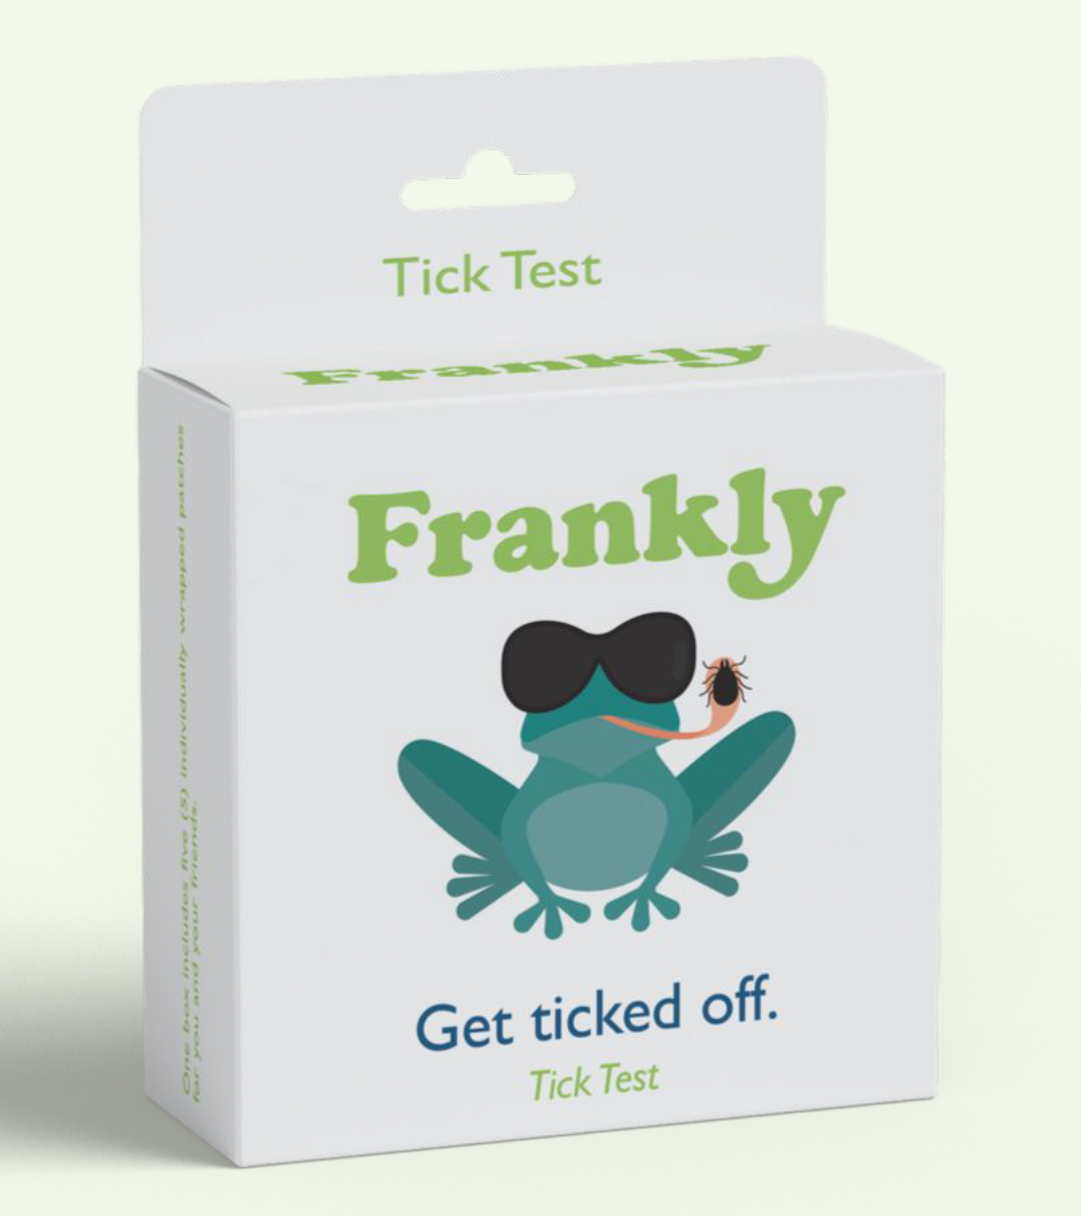 Packaging for Frankly tick test. Reads "Frankly: Get ticked off. Tick test"